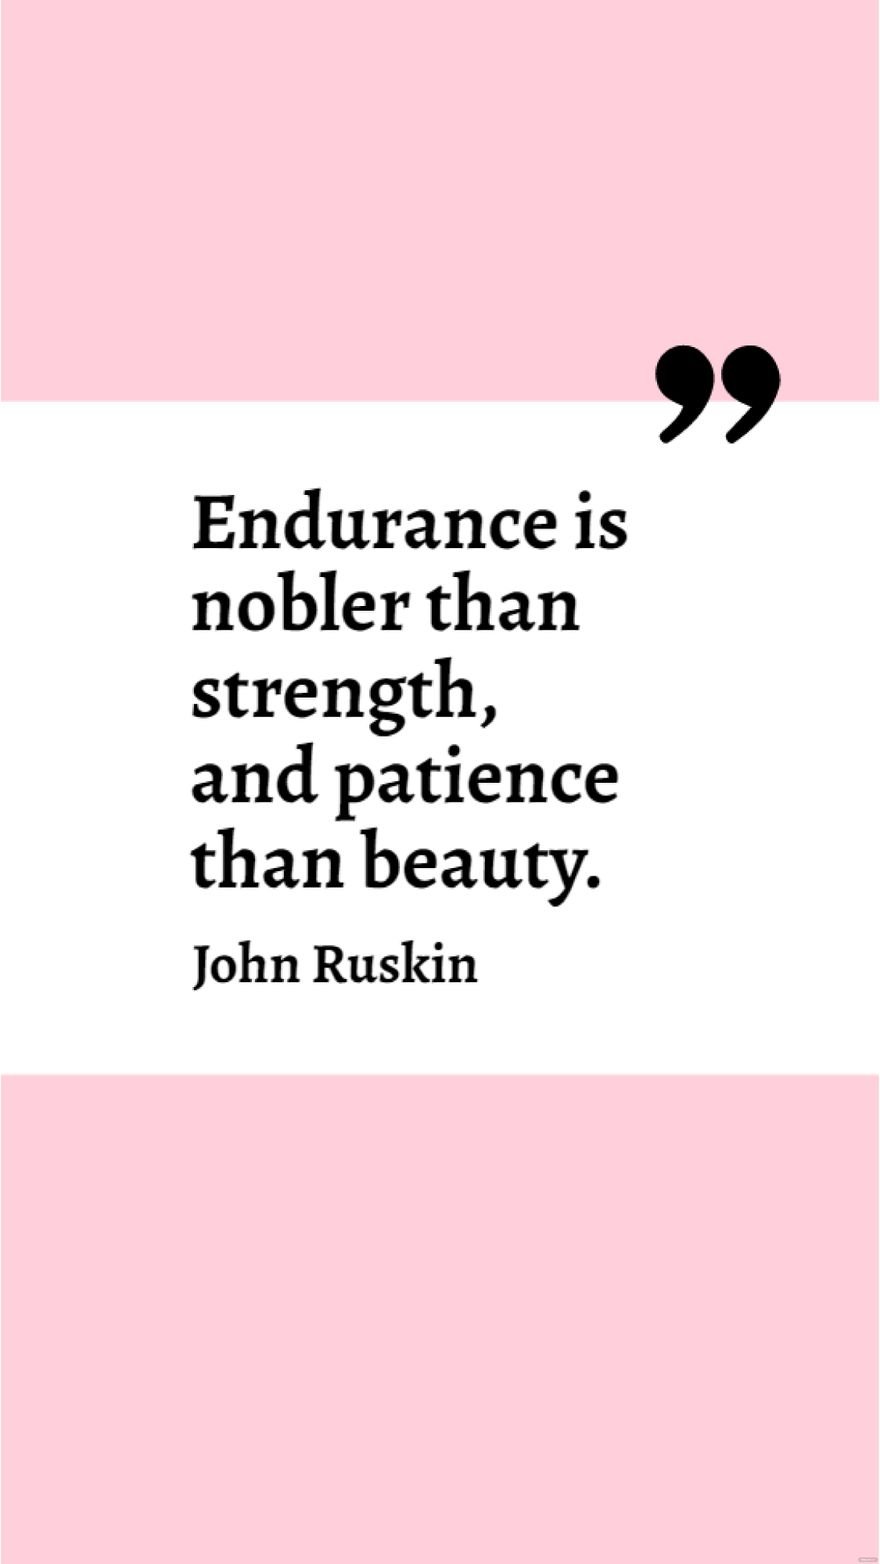 Free John Ruskin - Endurance is nobler than strength, and patience than beauty. in JPG